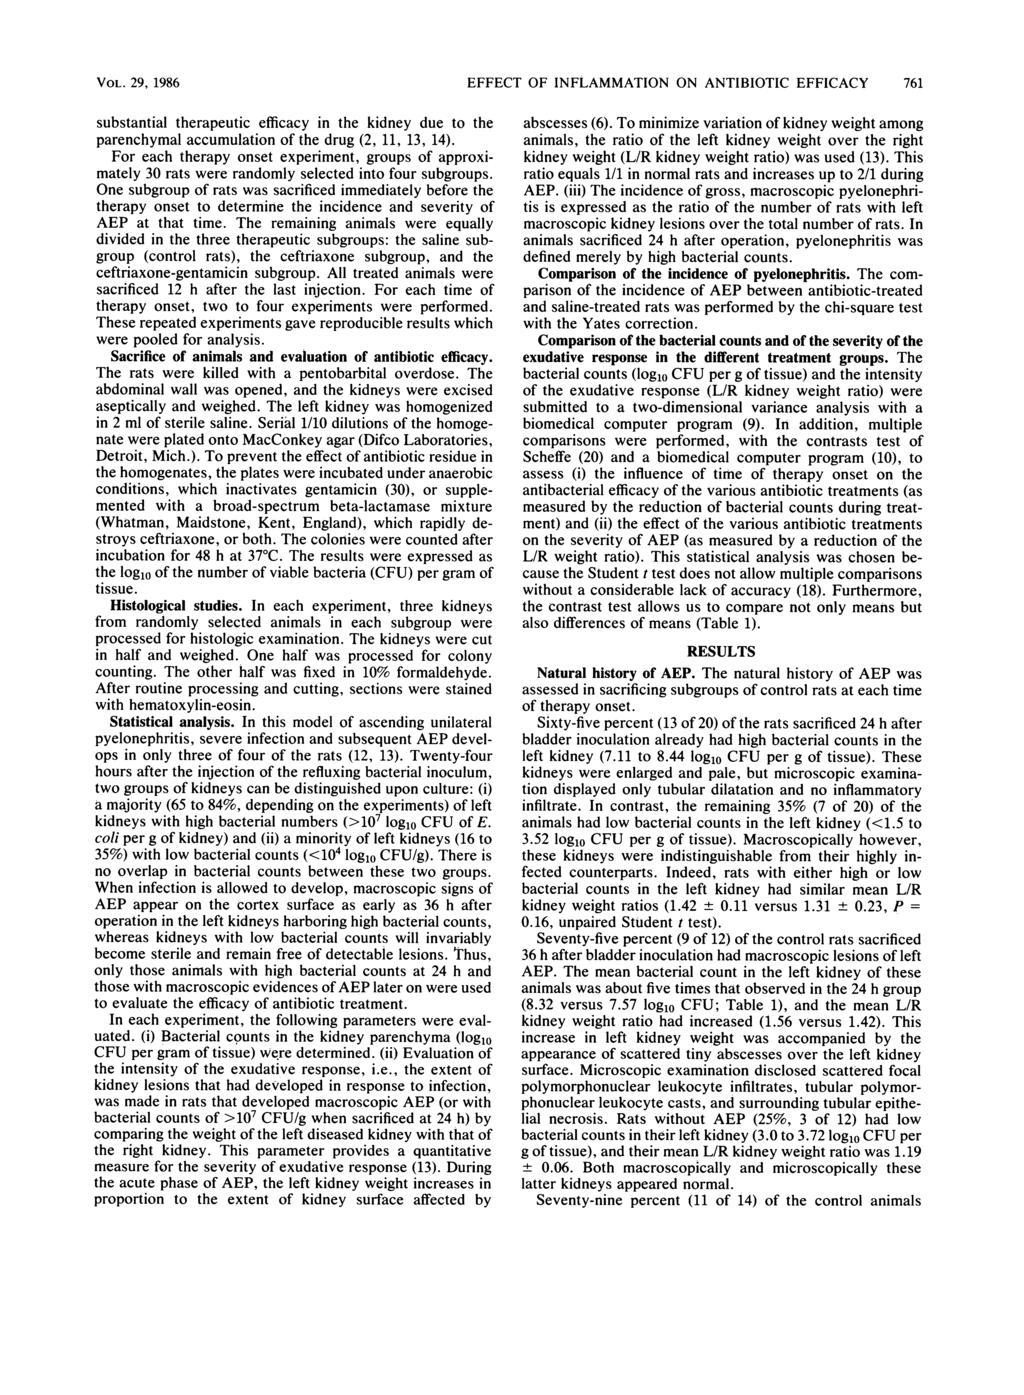 VOL. 29, 1986 EFFECT OF INFLAMMATION ON ANTIBIOTIC EFFICACY 761 substantial therapeutic efficacy in the kidney due to the parenchymal accumulation of the drug (2, 11, 13, 14).